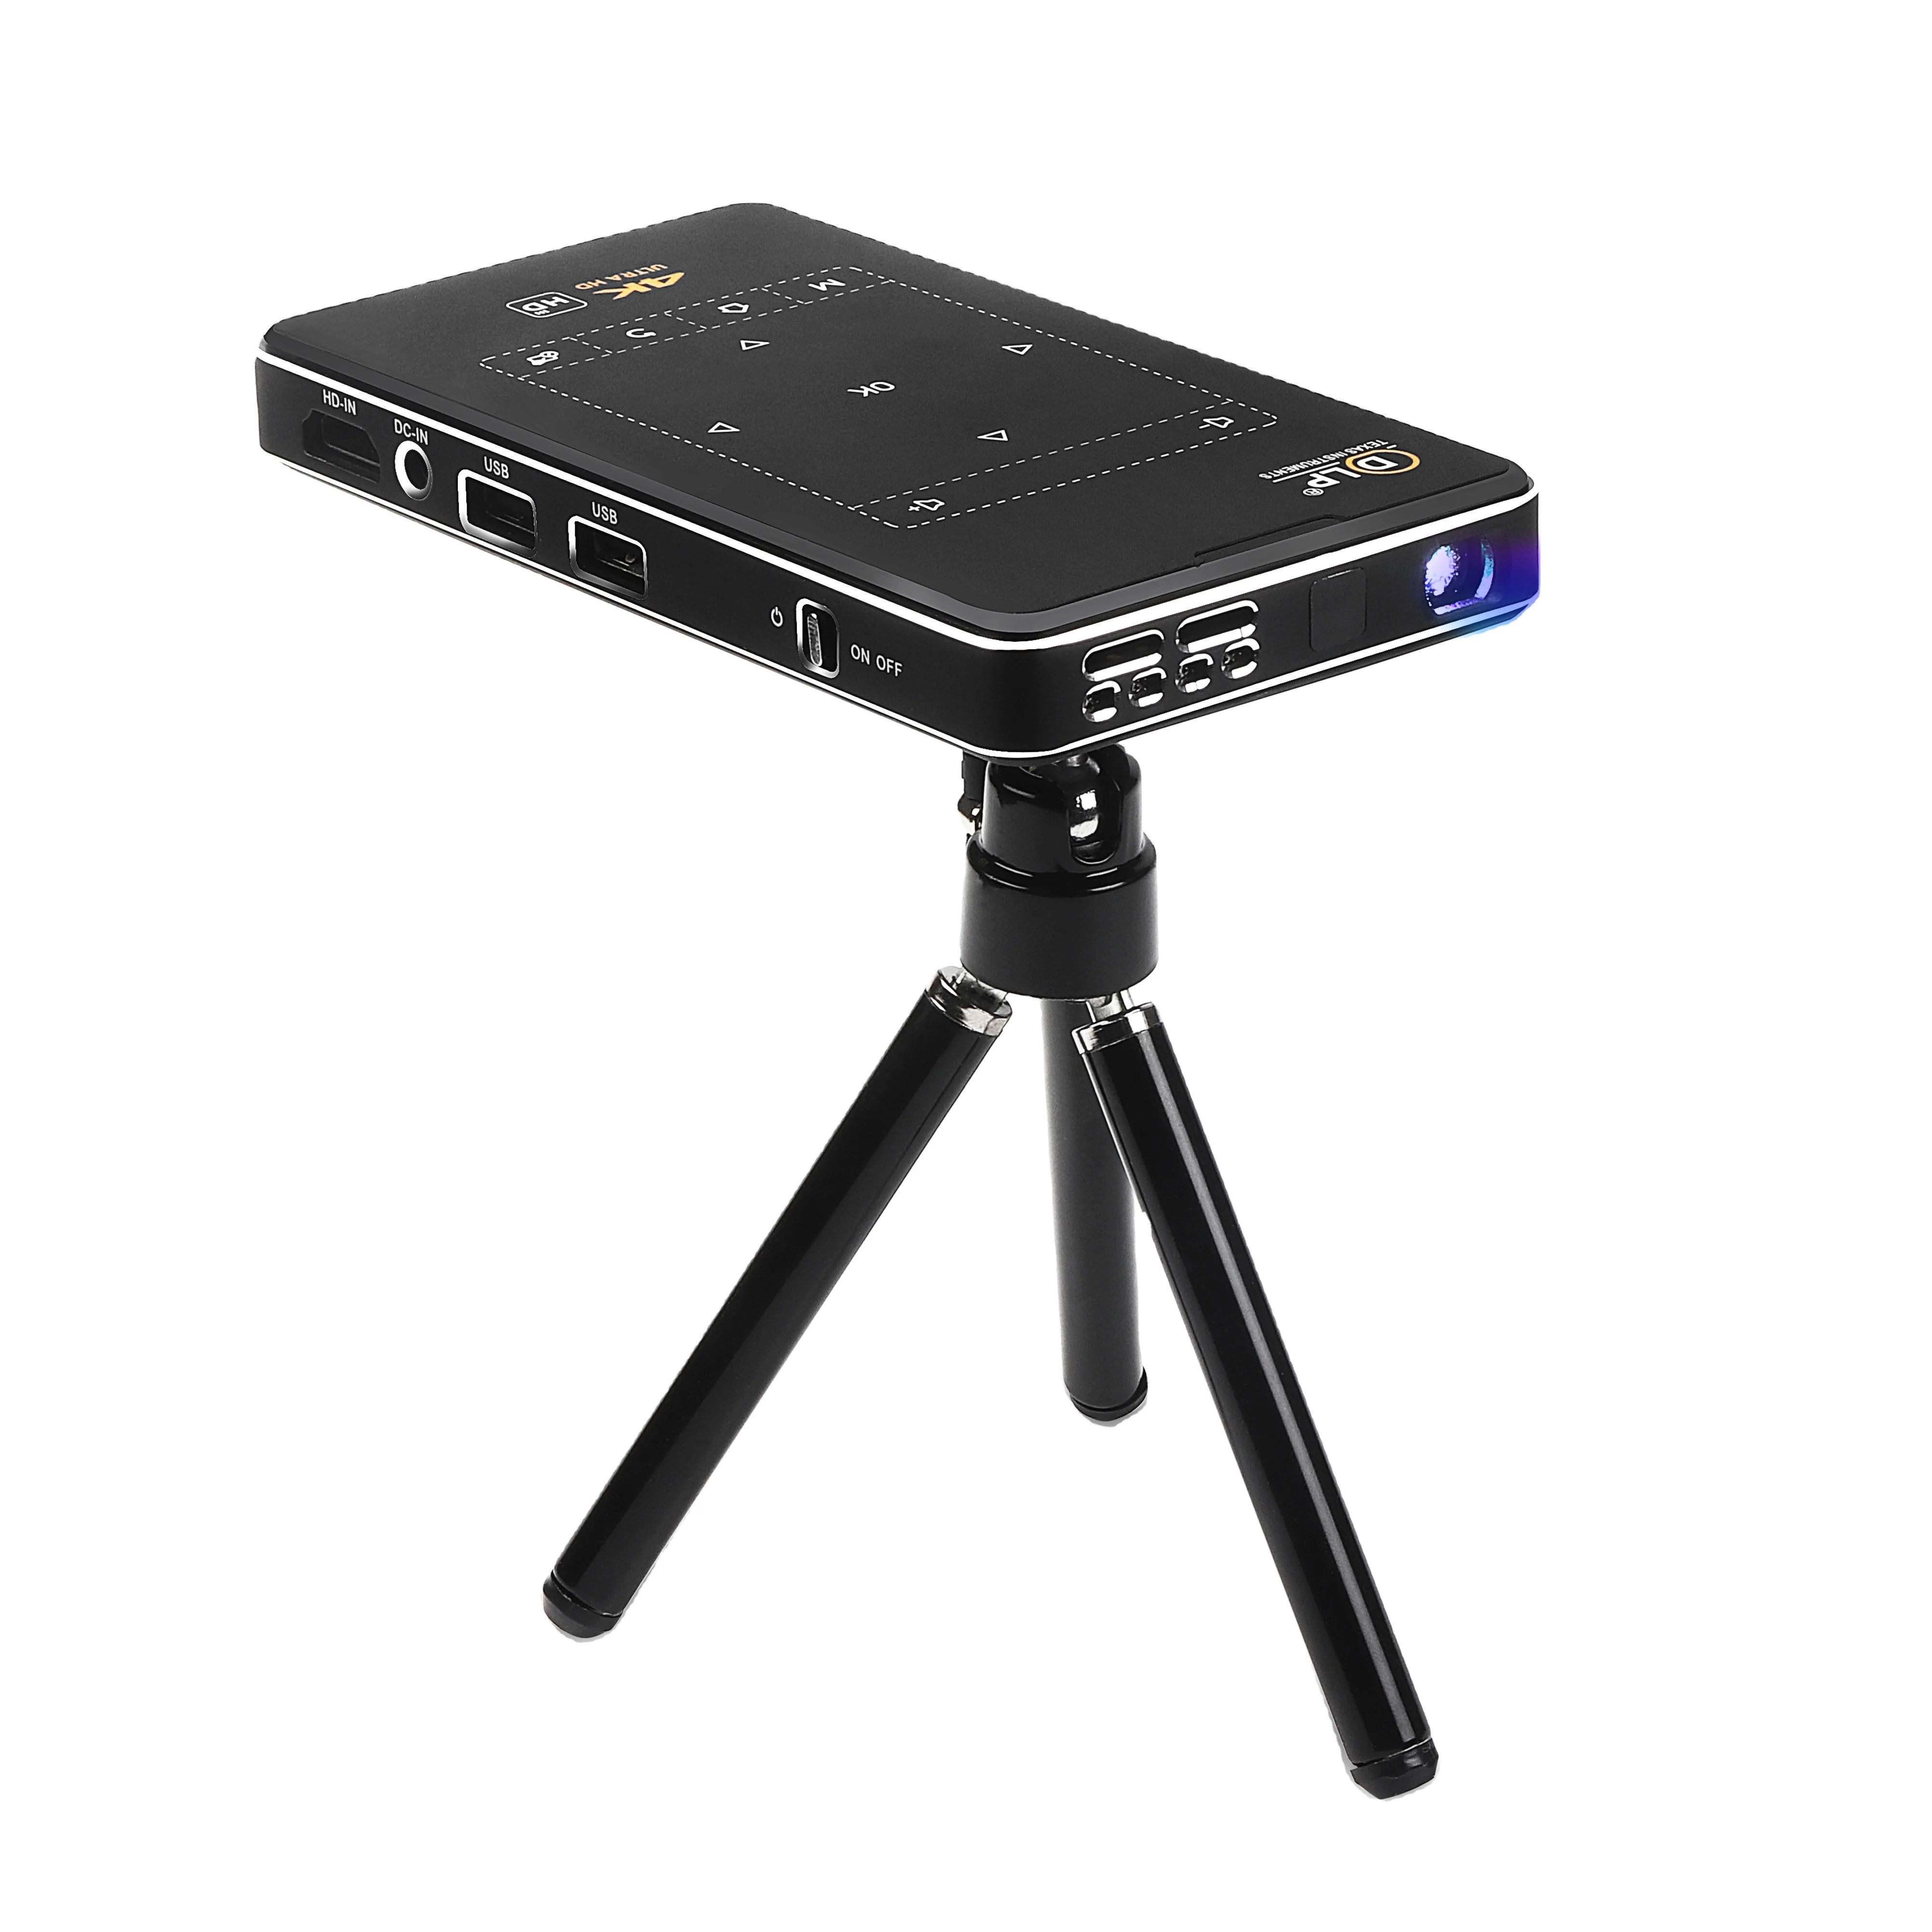 

DLP 4K Projector Portable Android Mini Smart Projector Black Business LED Light Focus Lamp Technology Speakers Style indoor CPU